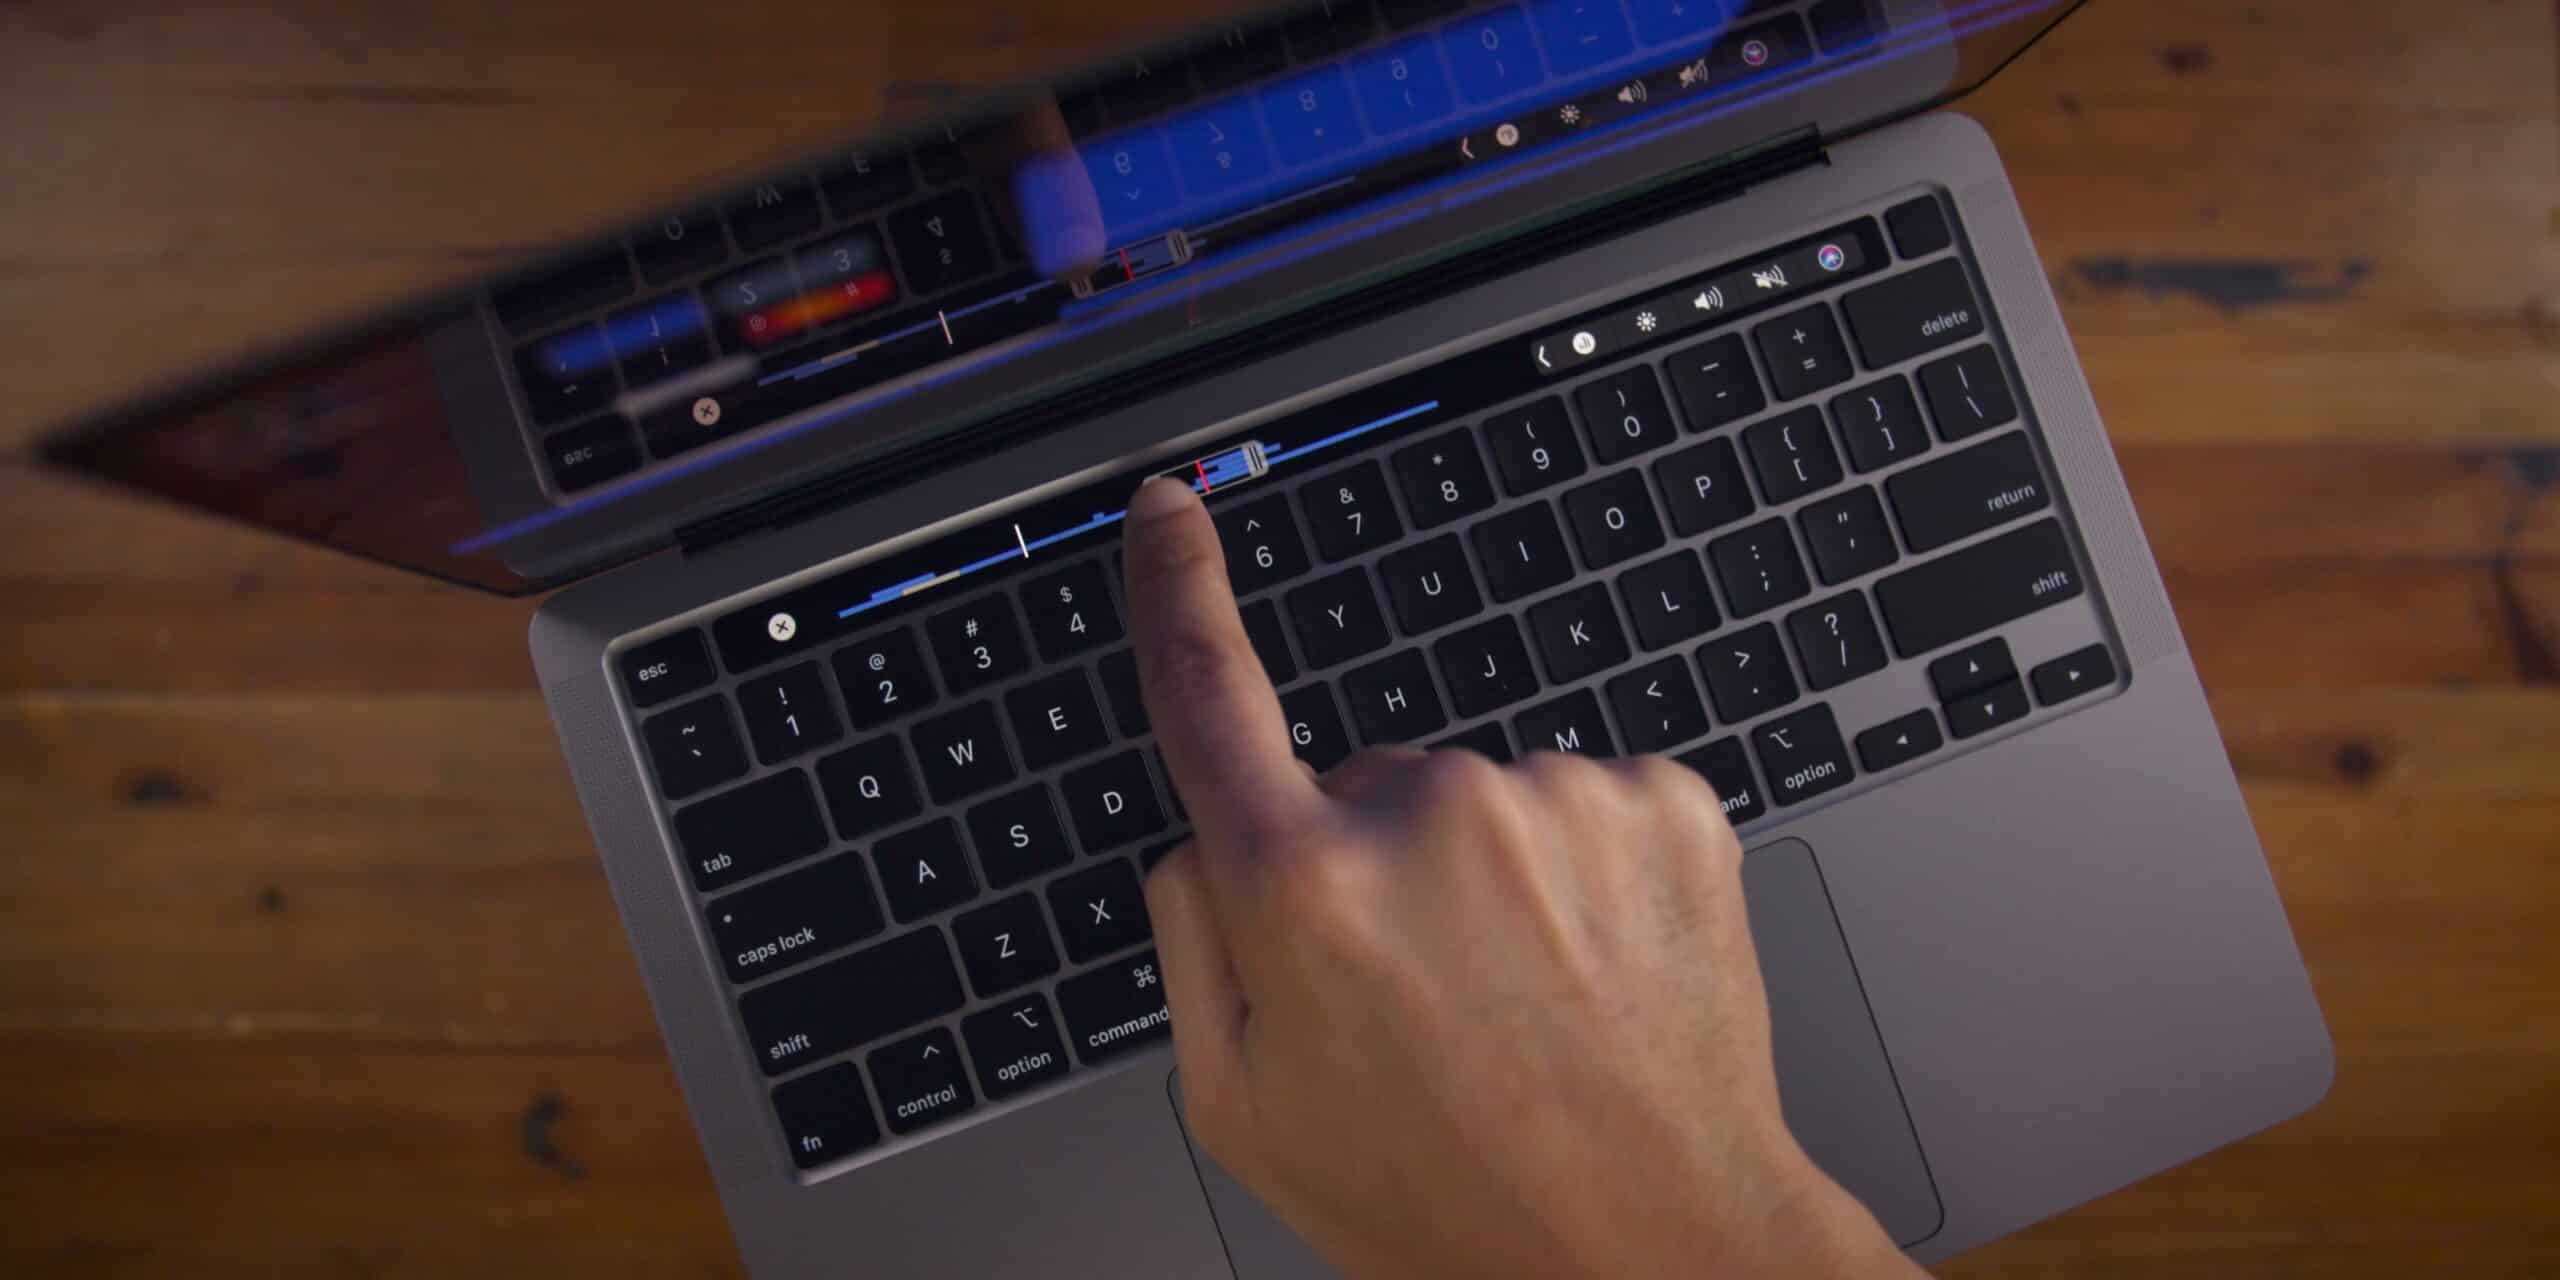 Apple should discard the TouchBar from MacBook Pros